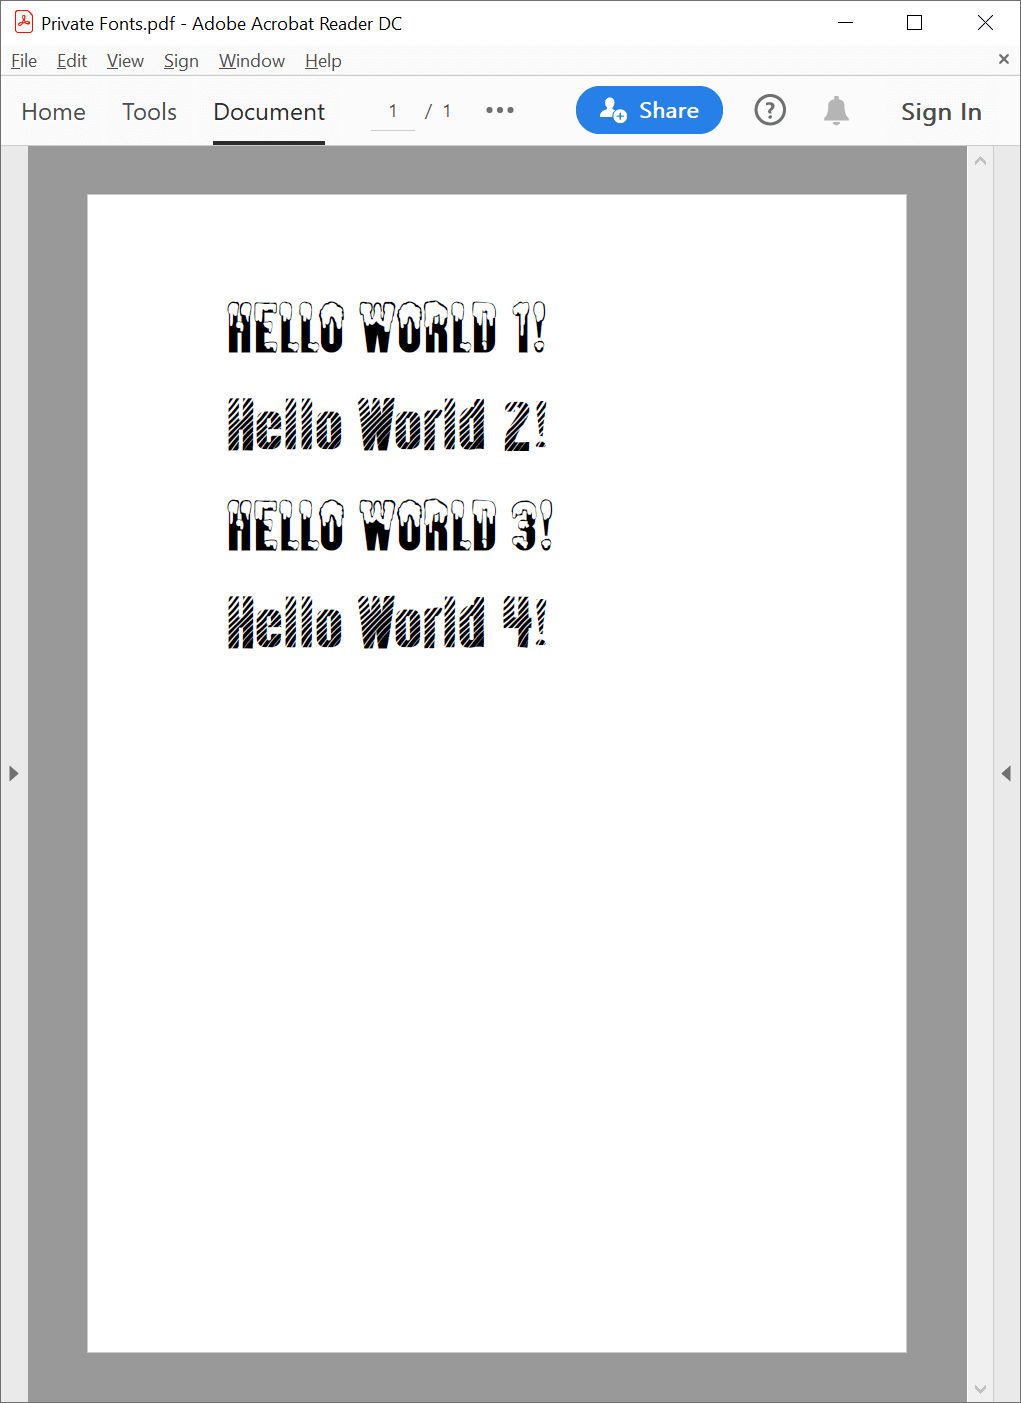 PDF file with text from private fonts